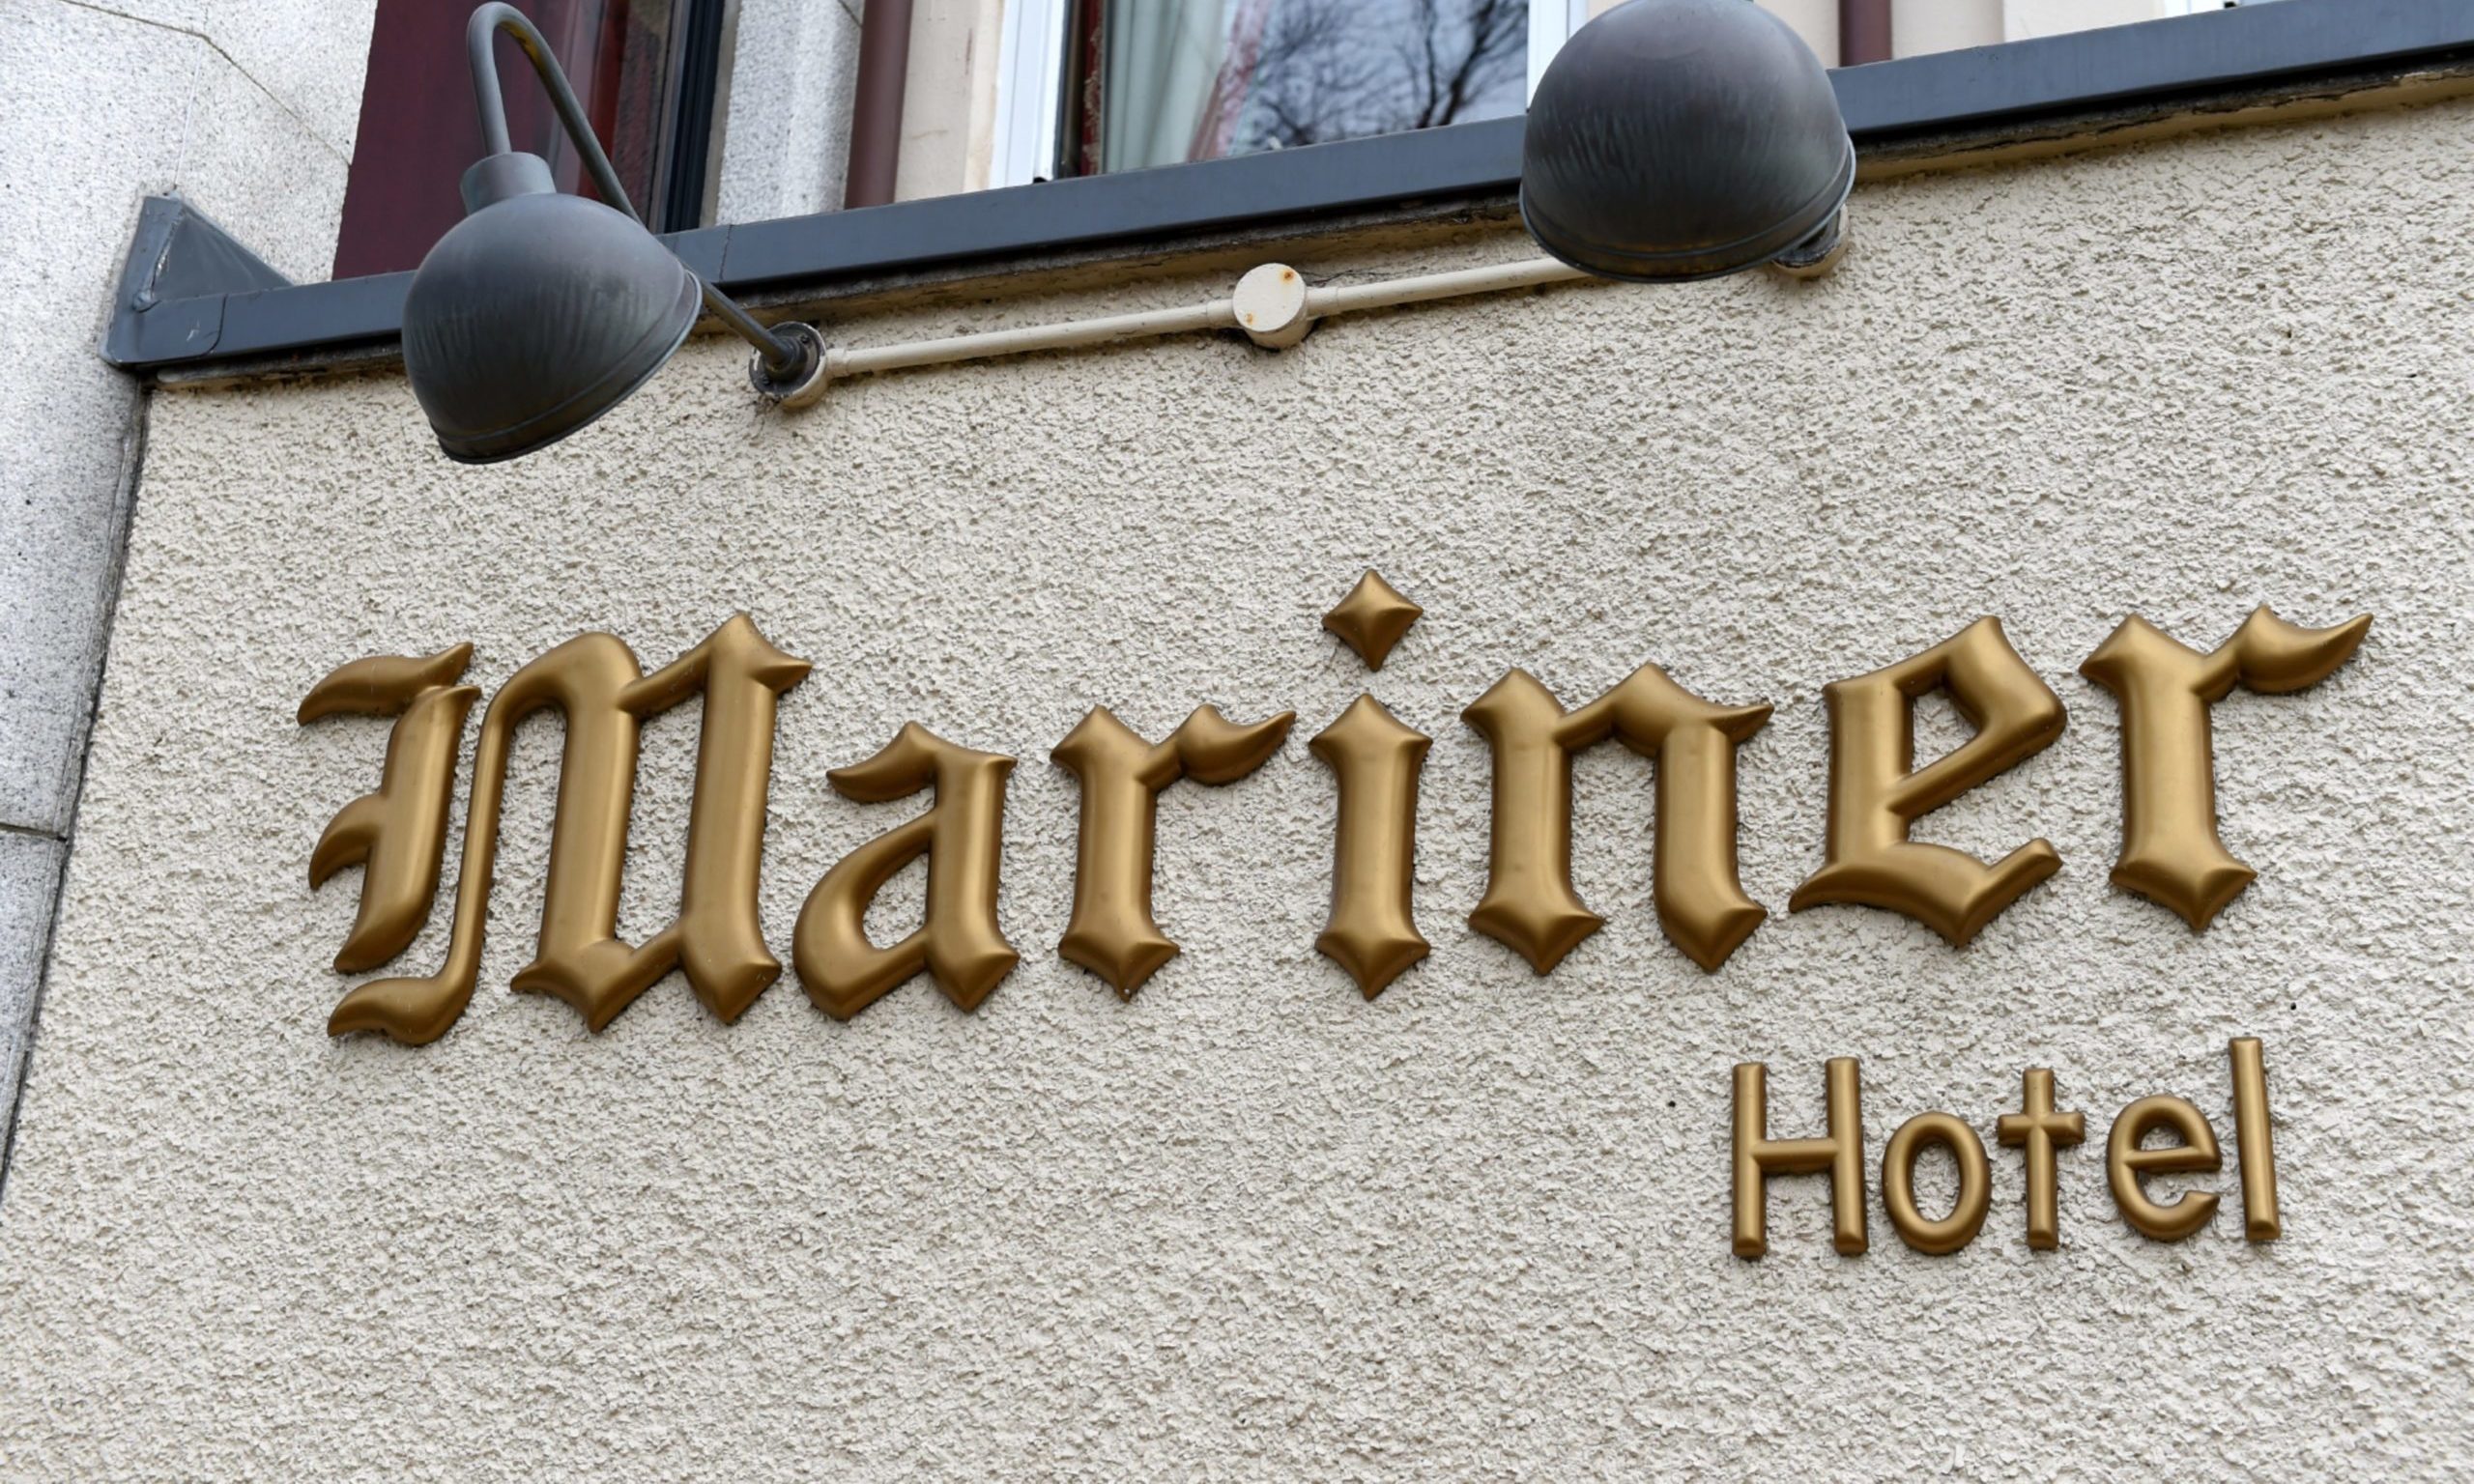 A Mariner Hotel sign hangs on the building.